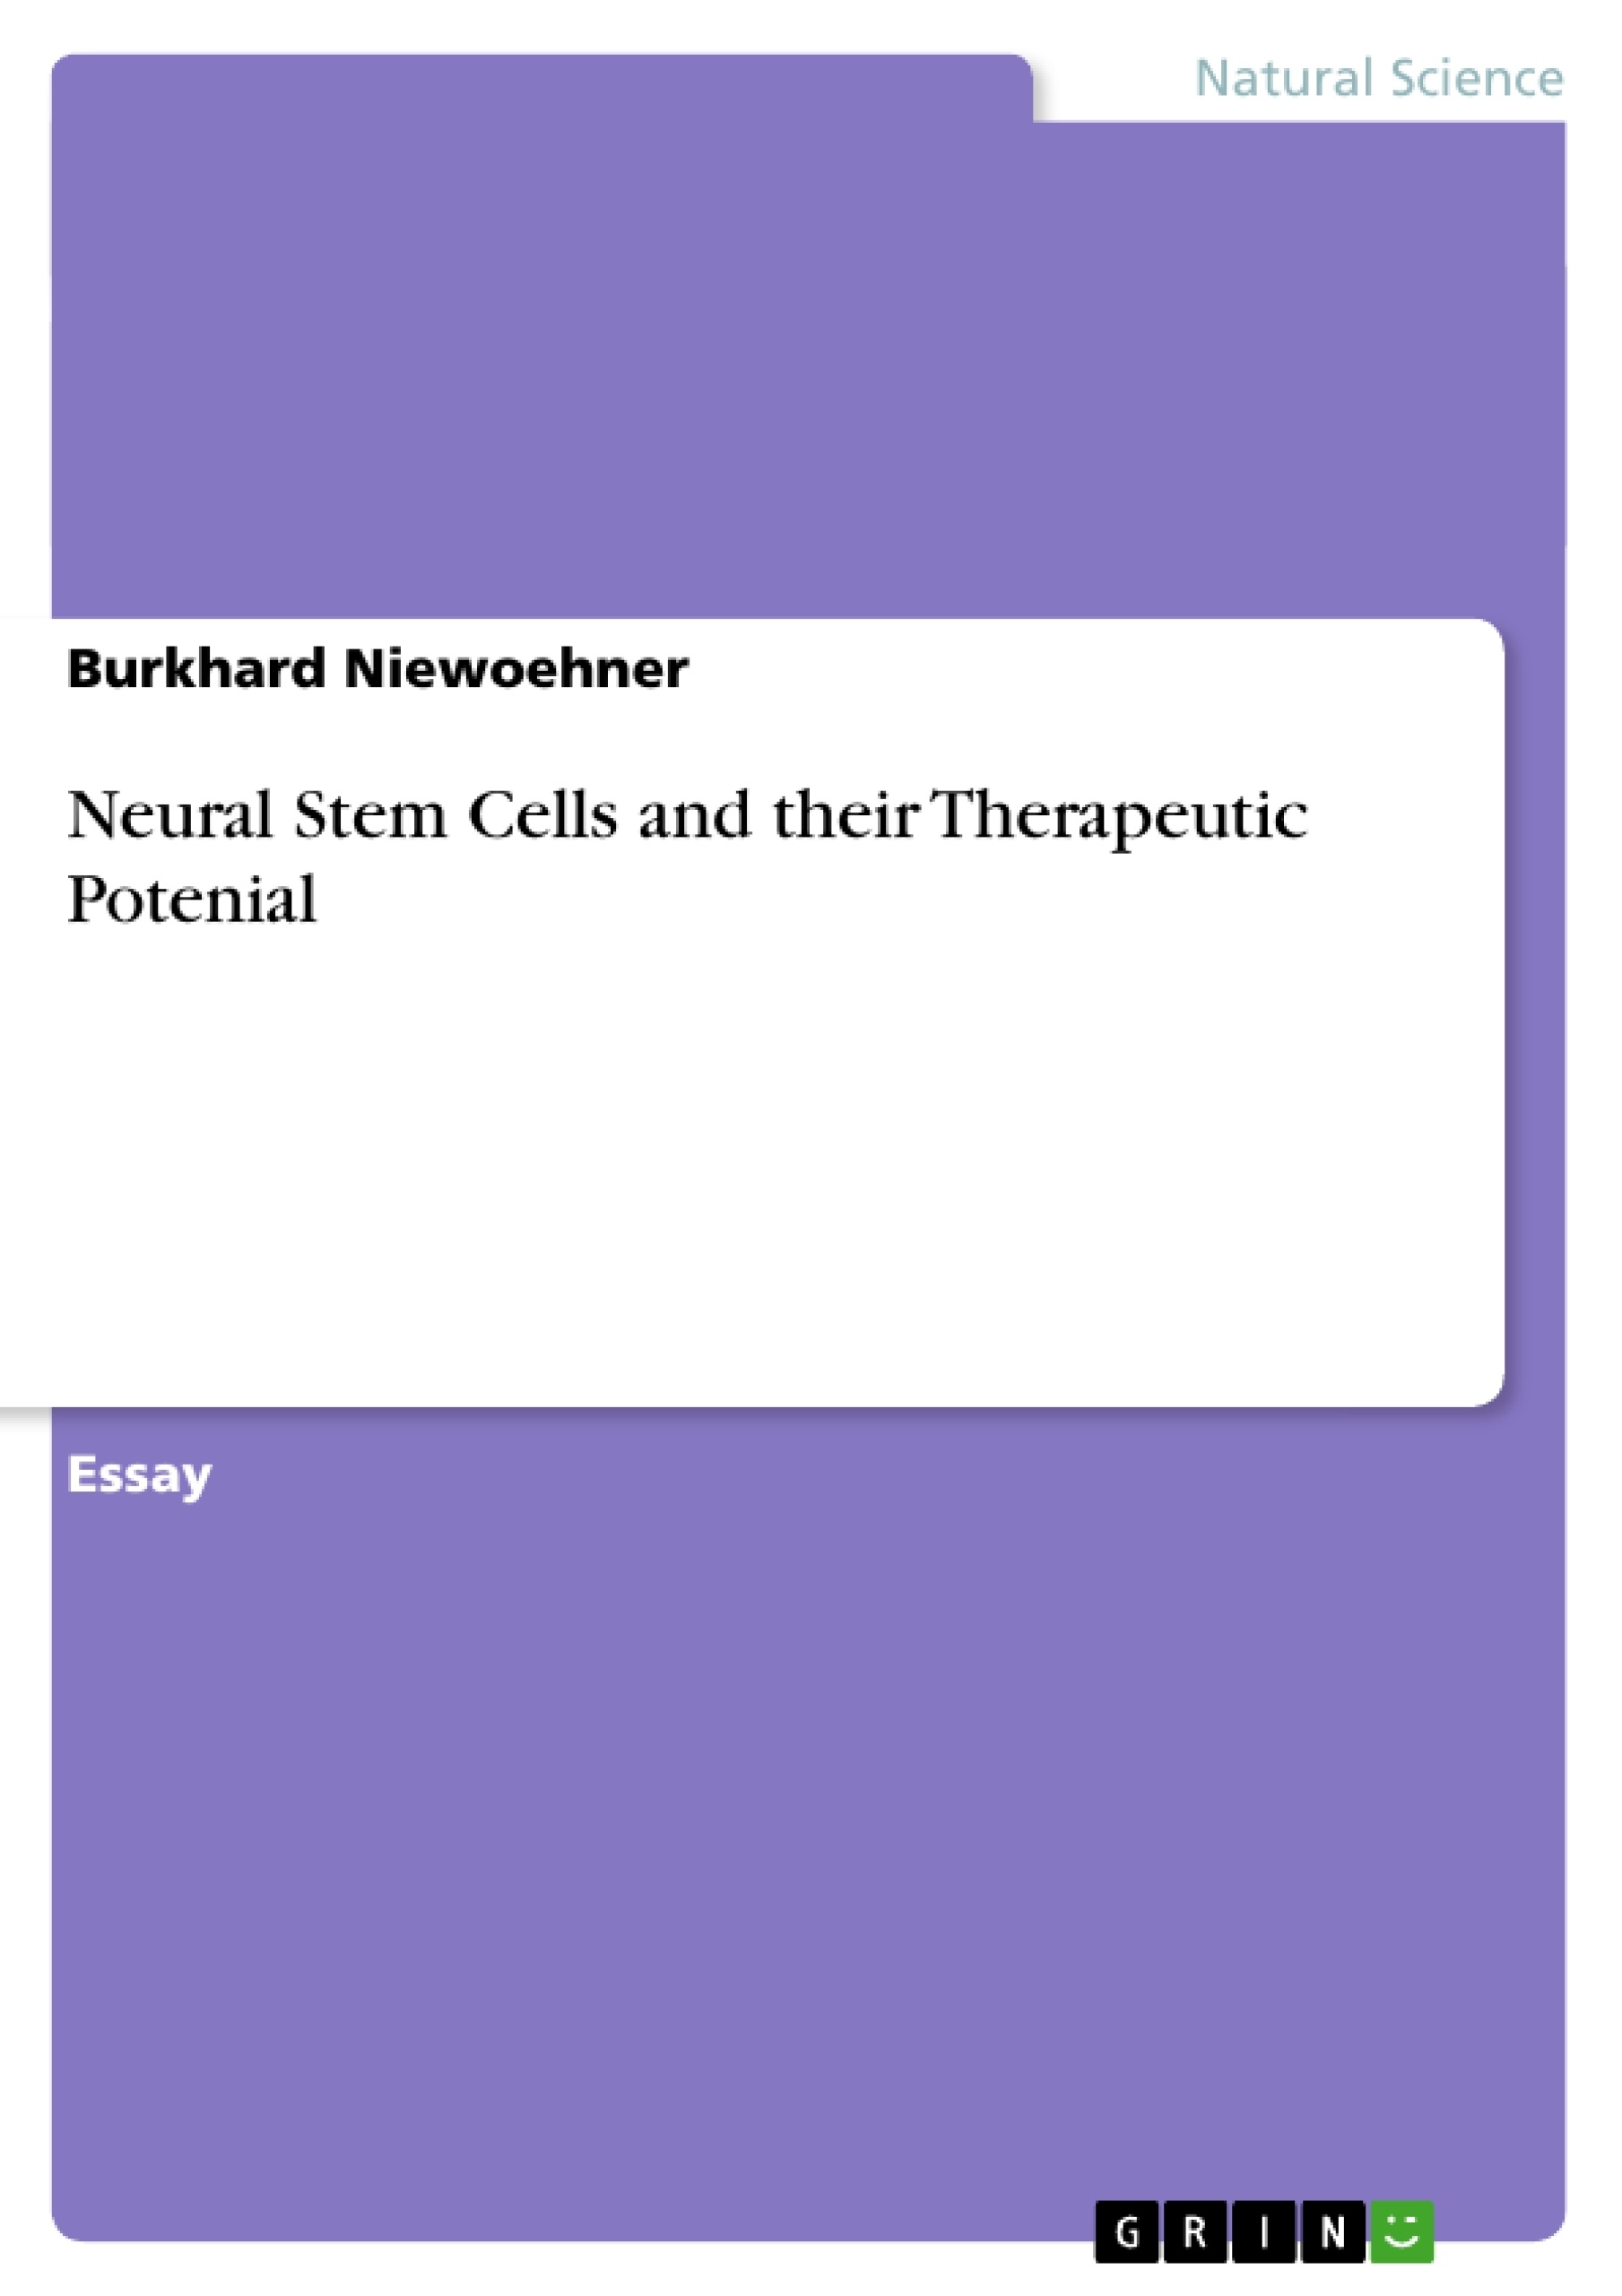 Title: Neural Stem Cells and their Therapeutic Potenial